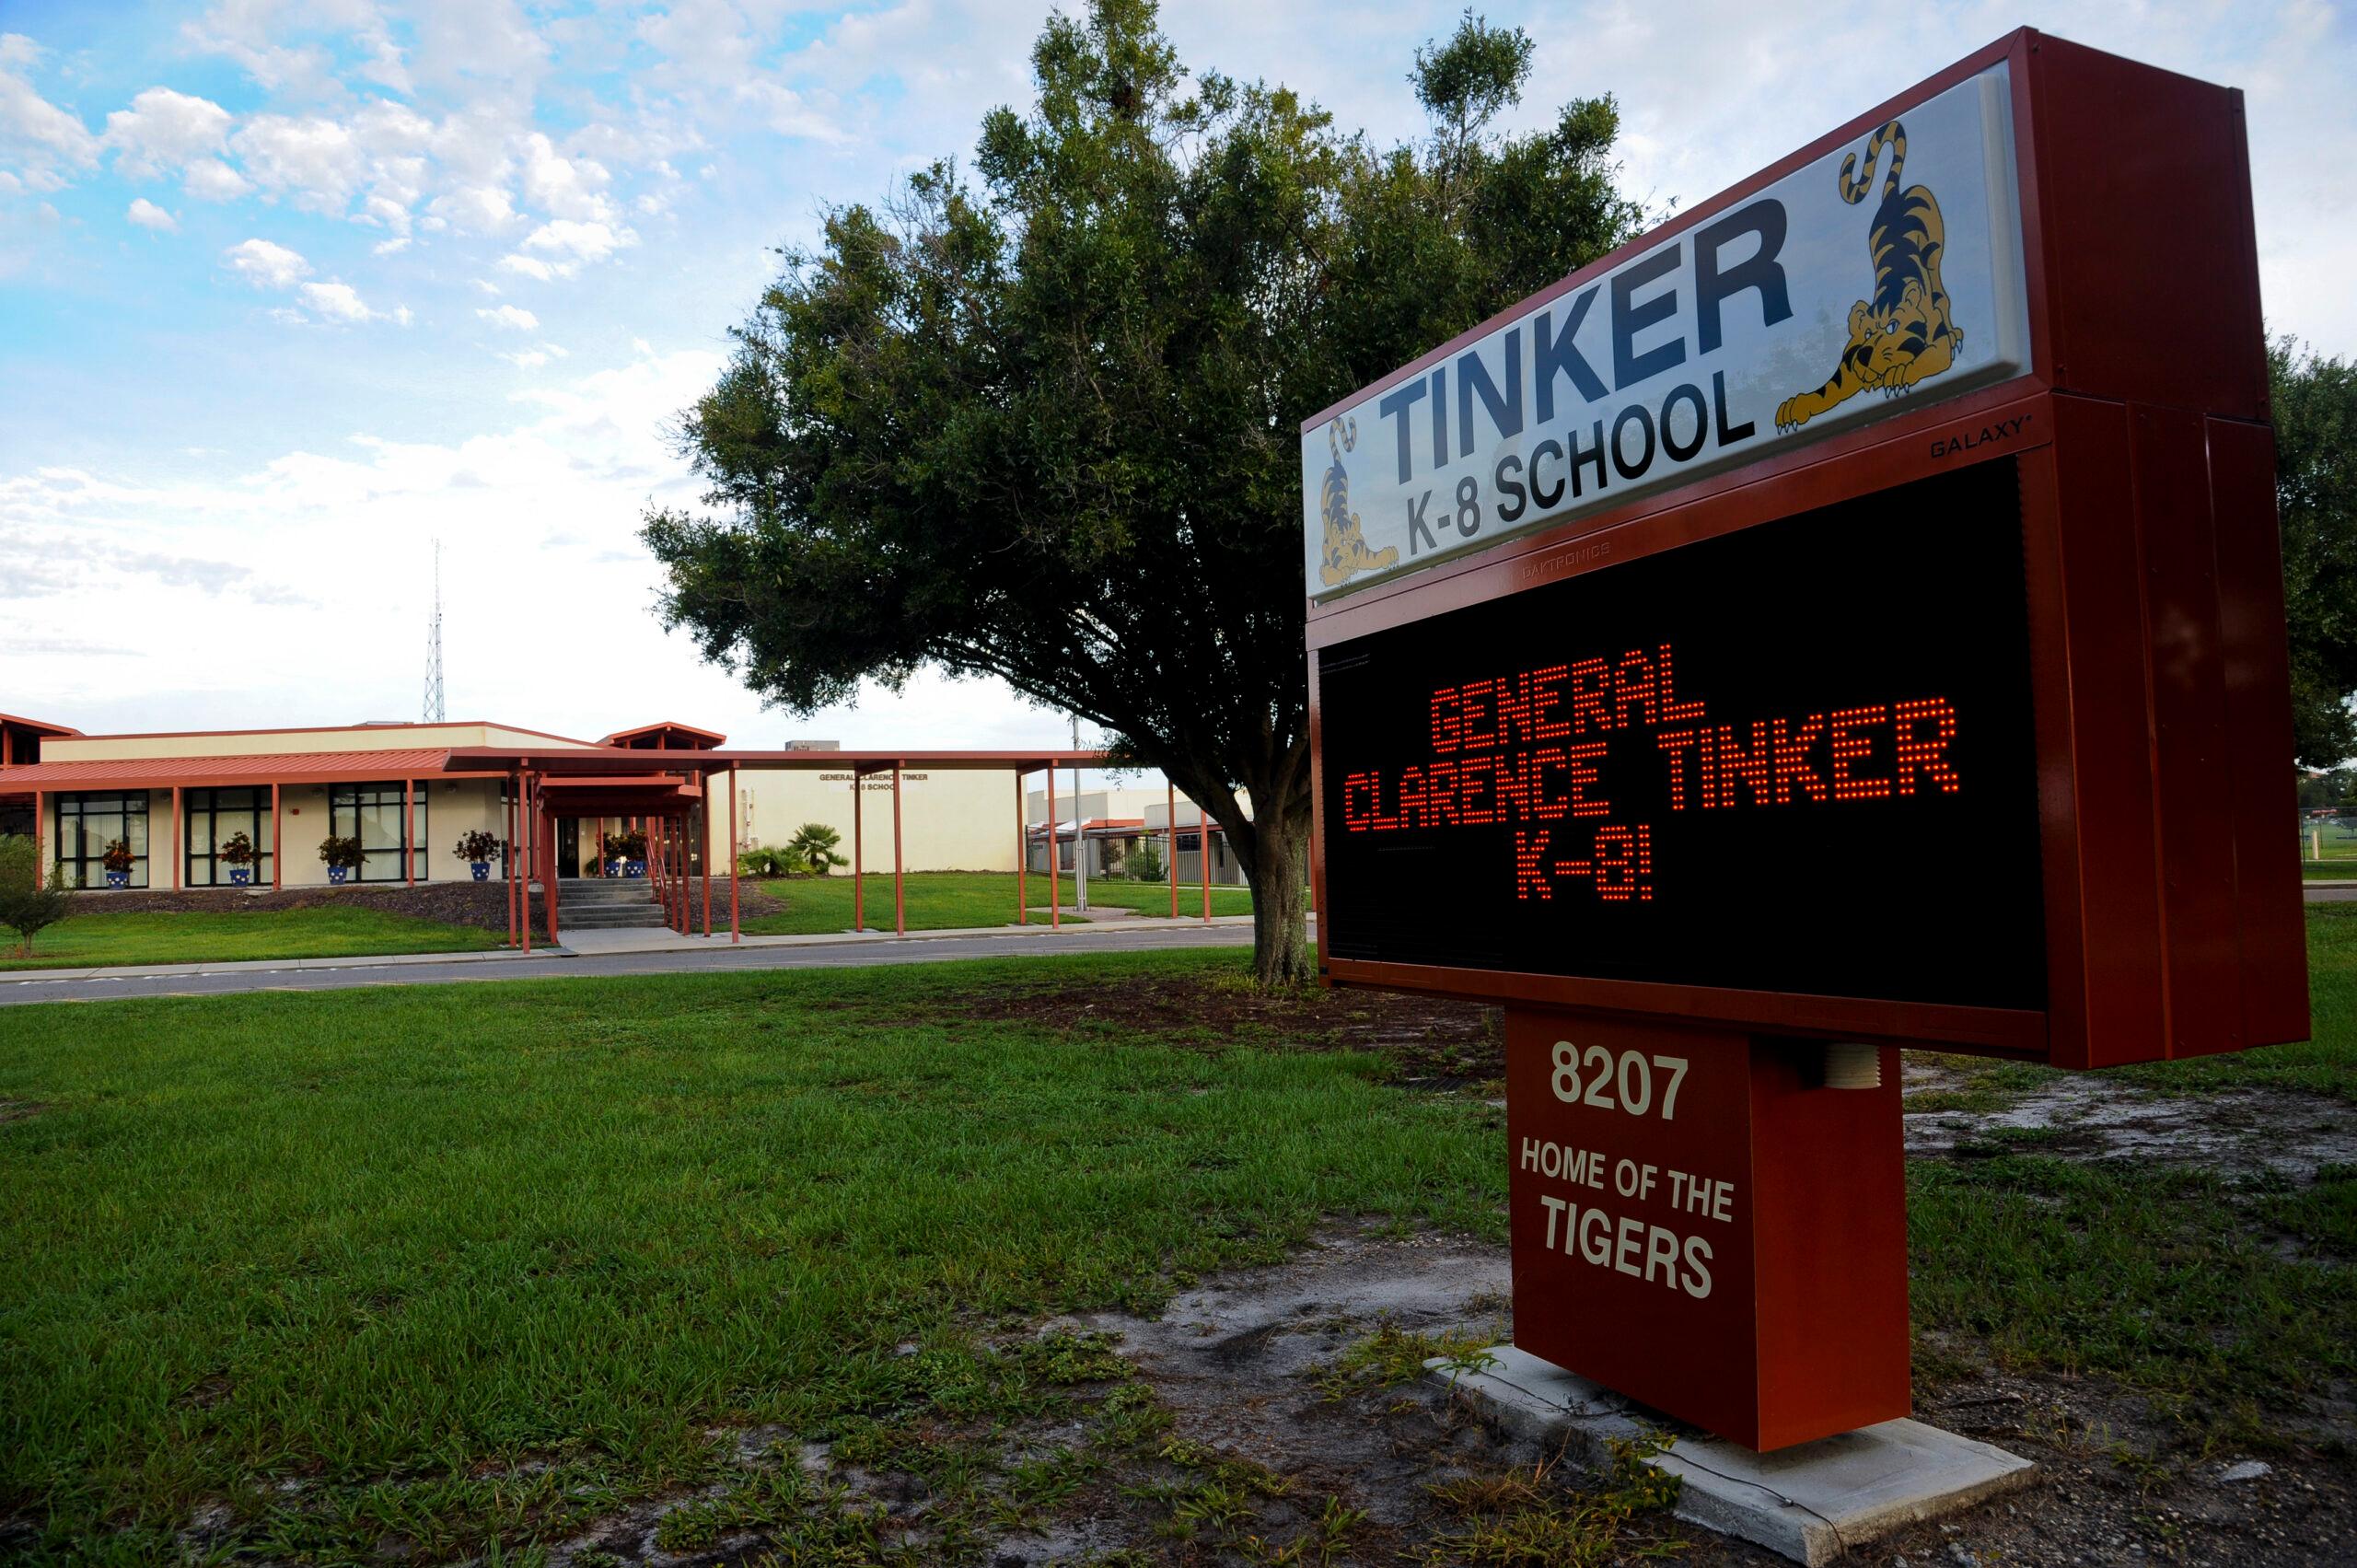 Tinker K-8 School: great effort to support military families